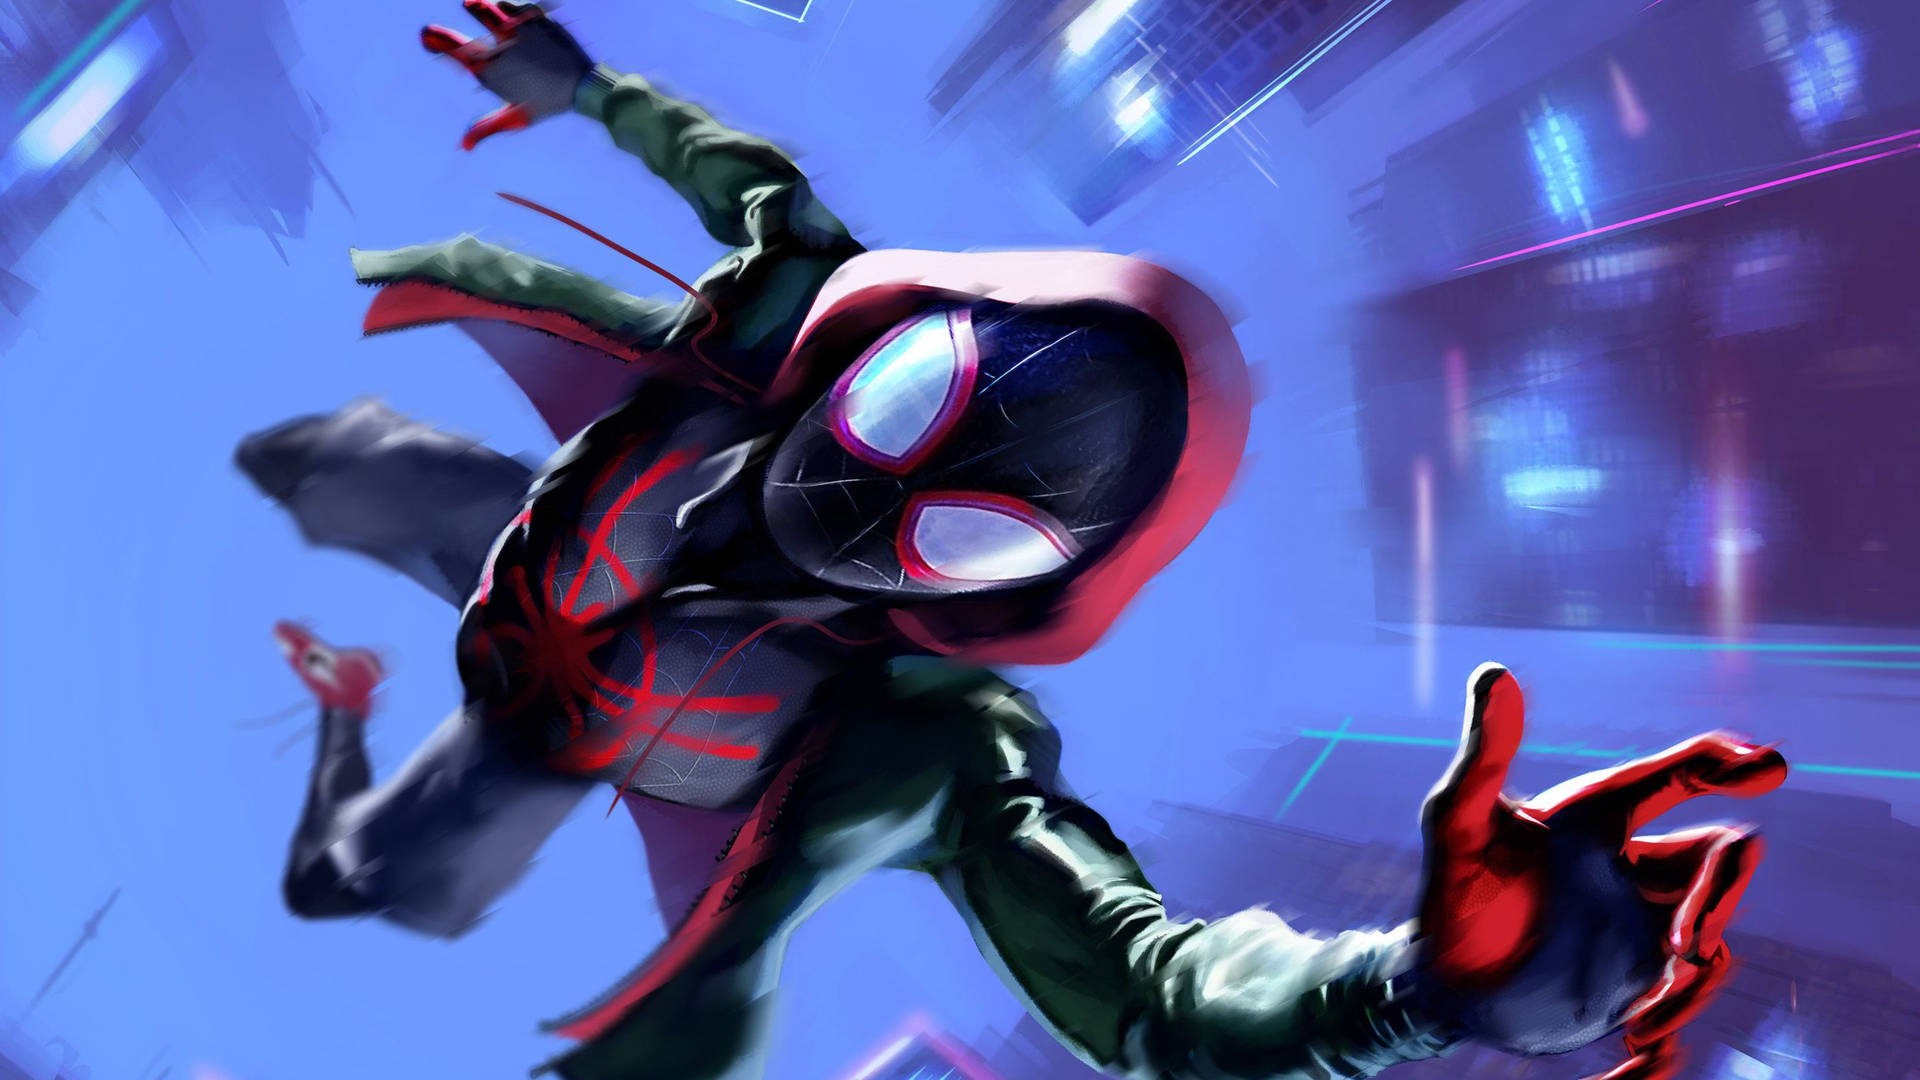 "Miles Morales is the newest Spider-Man on the scene in the movie Spider-Man: Into the Spider-Verse!" Wallpaper